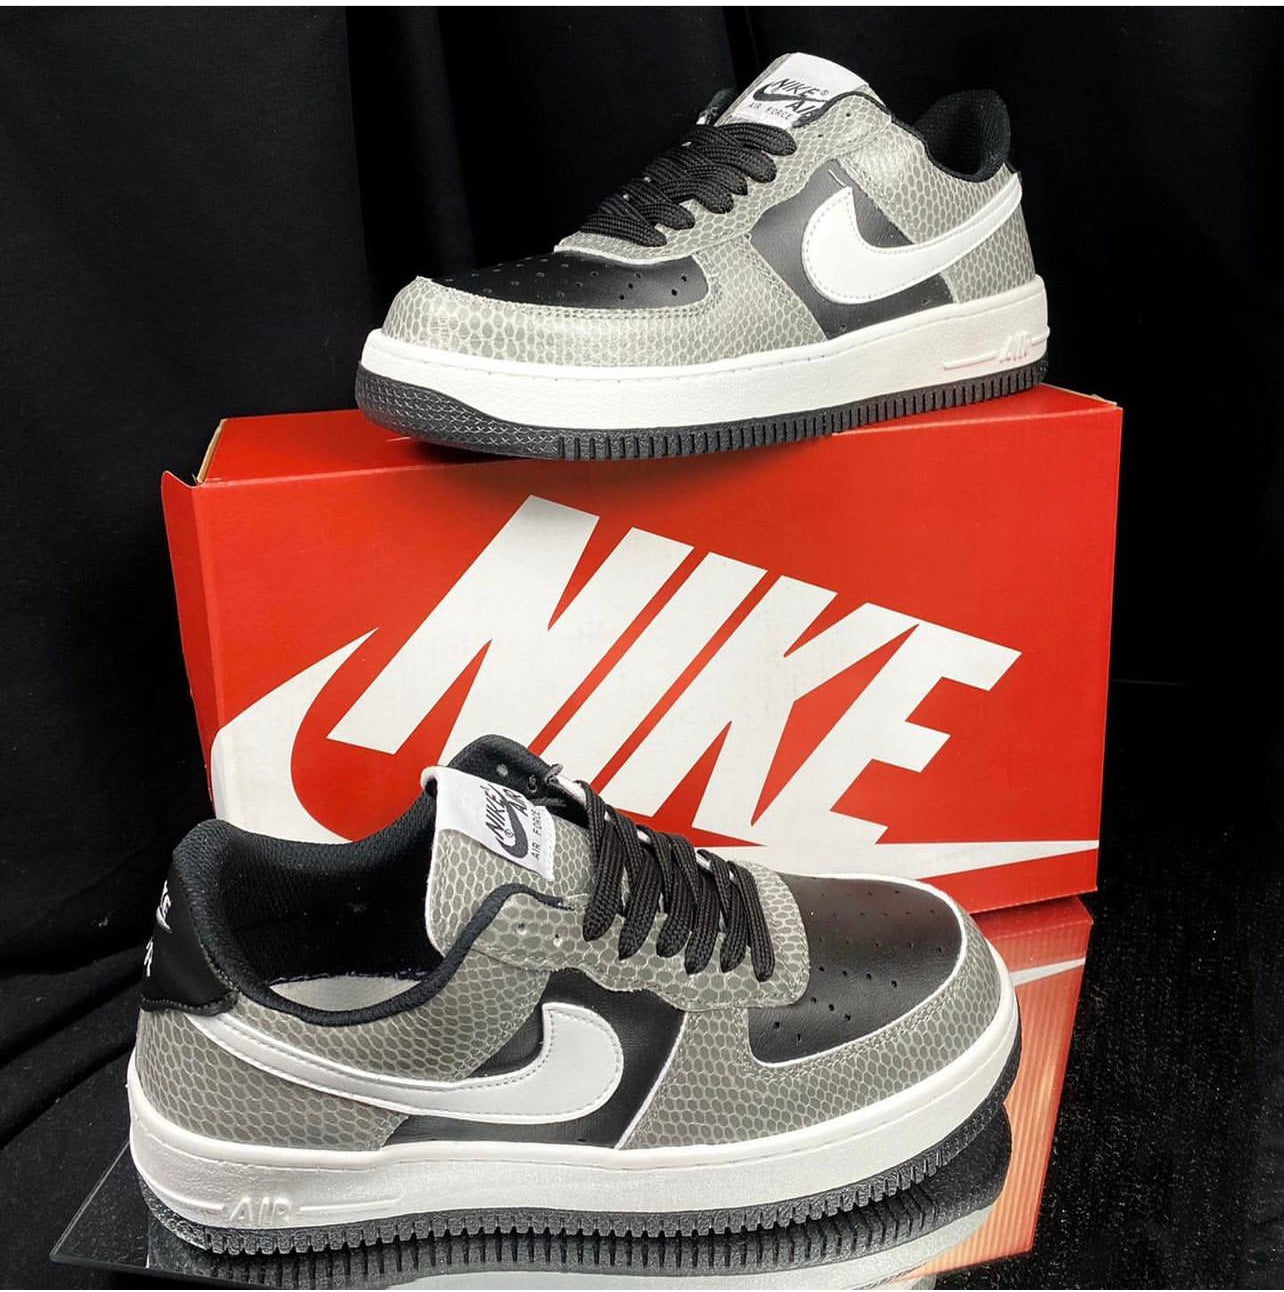 Air force 1 “Snake” Gris